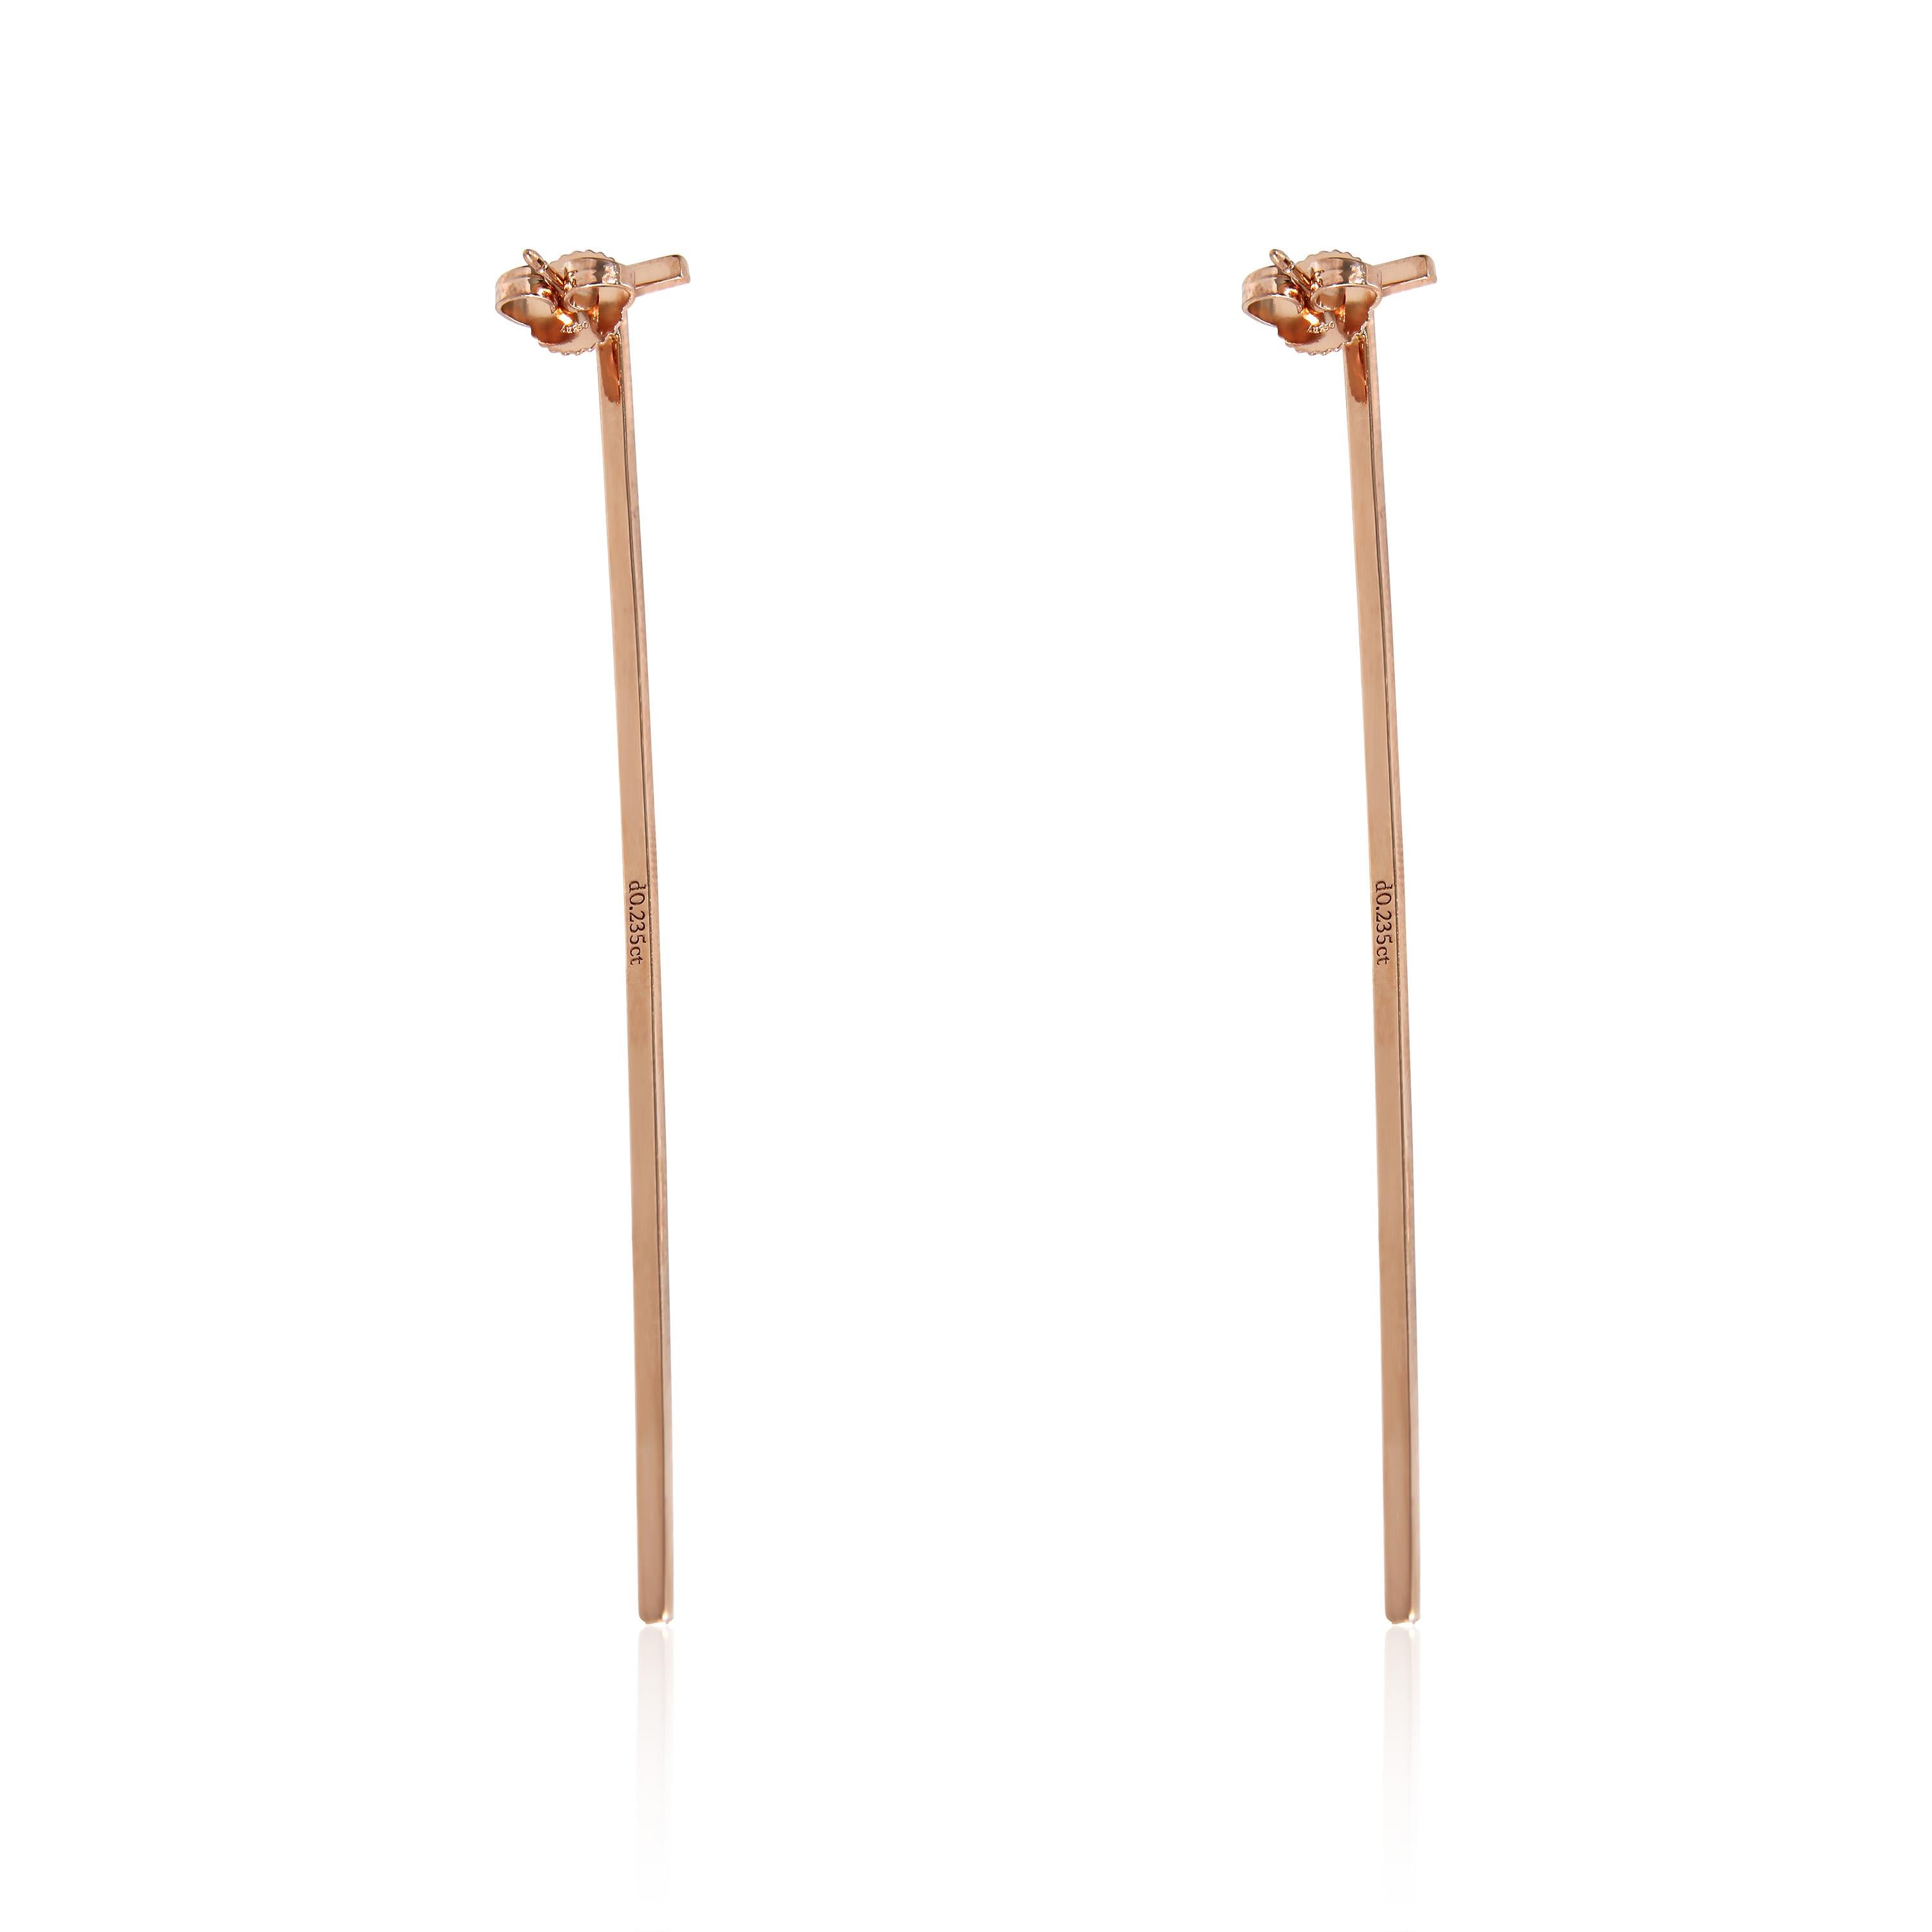 Tiffany & Co. Tiffany T Earrings in 18K Rose Gold 0.47 CTW

PRIMARY DETAILS
SKU: 133668
Listing Title: Tiffany & Co. Tiffany T Earrings in 18K Rose Gold 0.47 CTW
Condition Description: Inspired by the 'T' motif that Tiffany has been incorporating